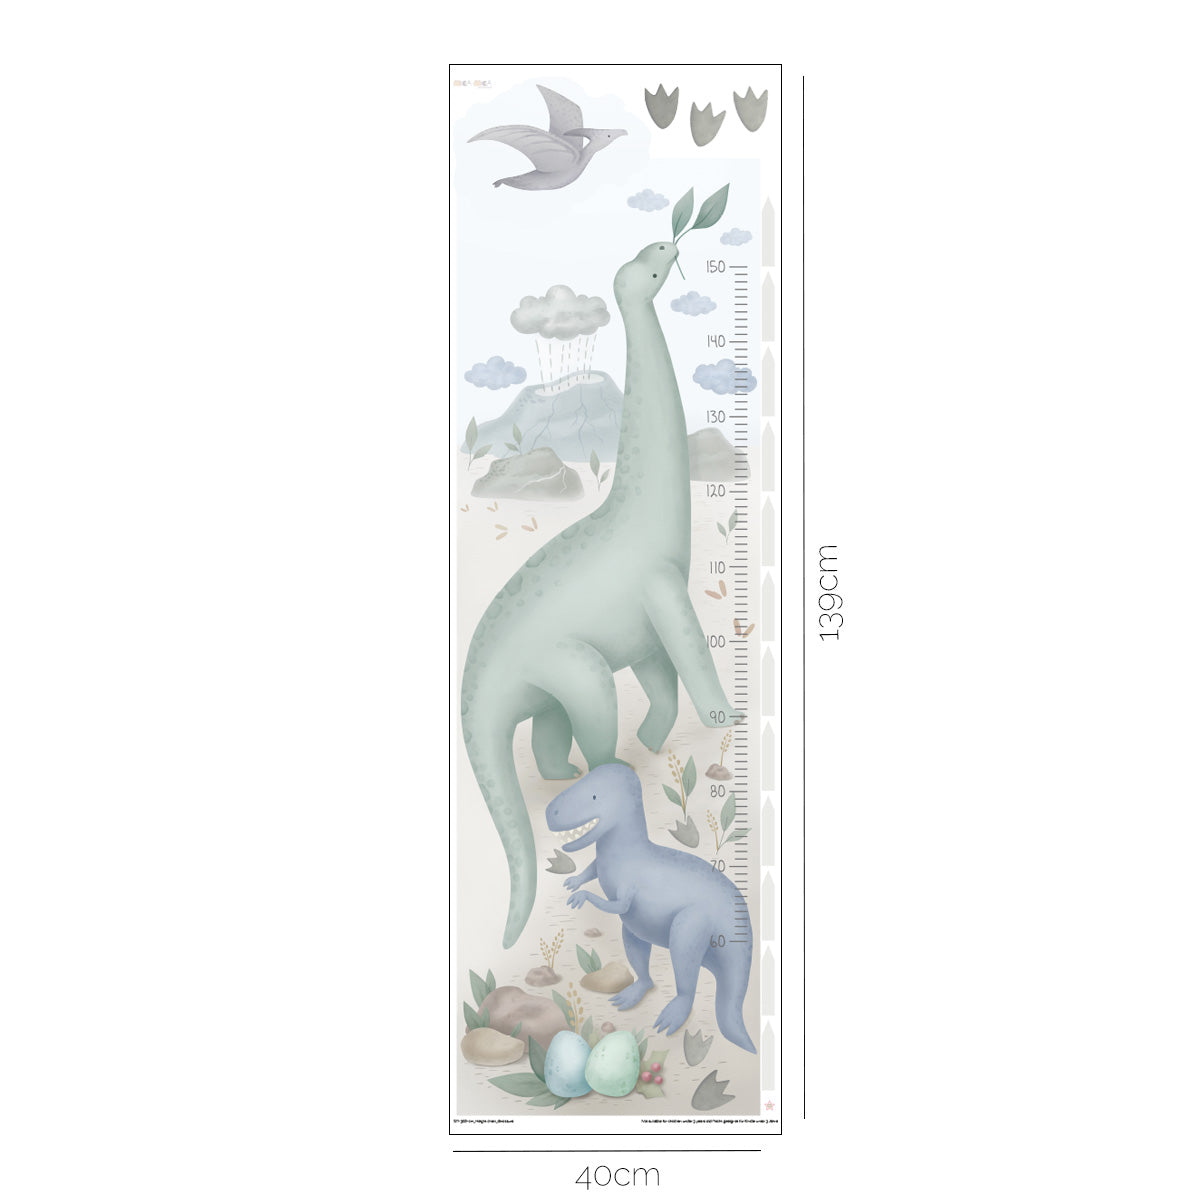 Height chart wall stickers - Dinoaur Expedition growth chart